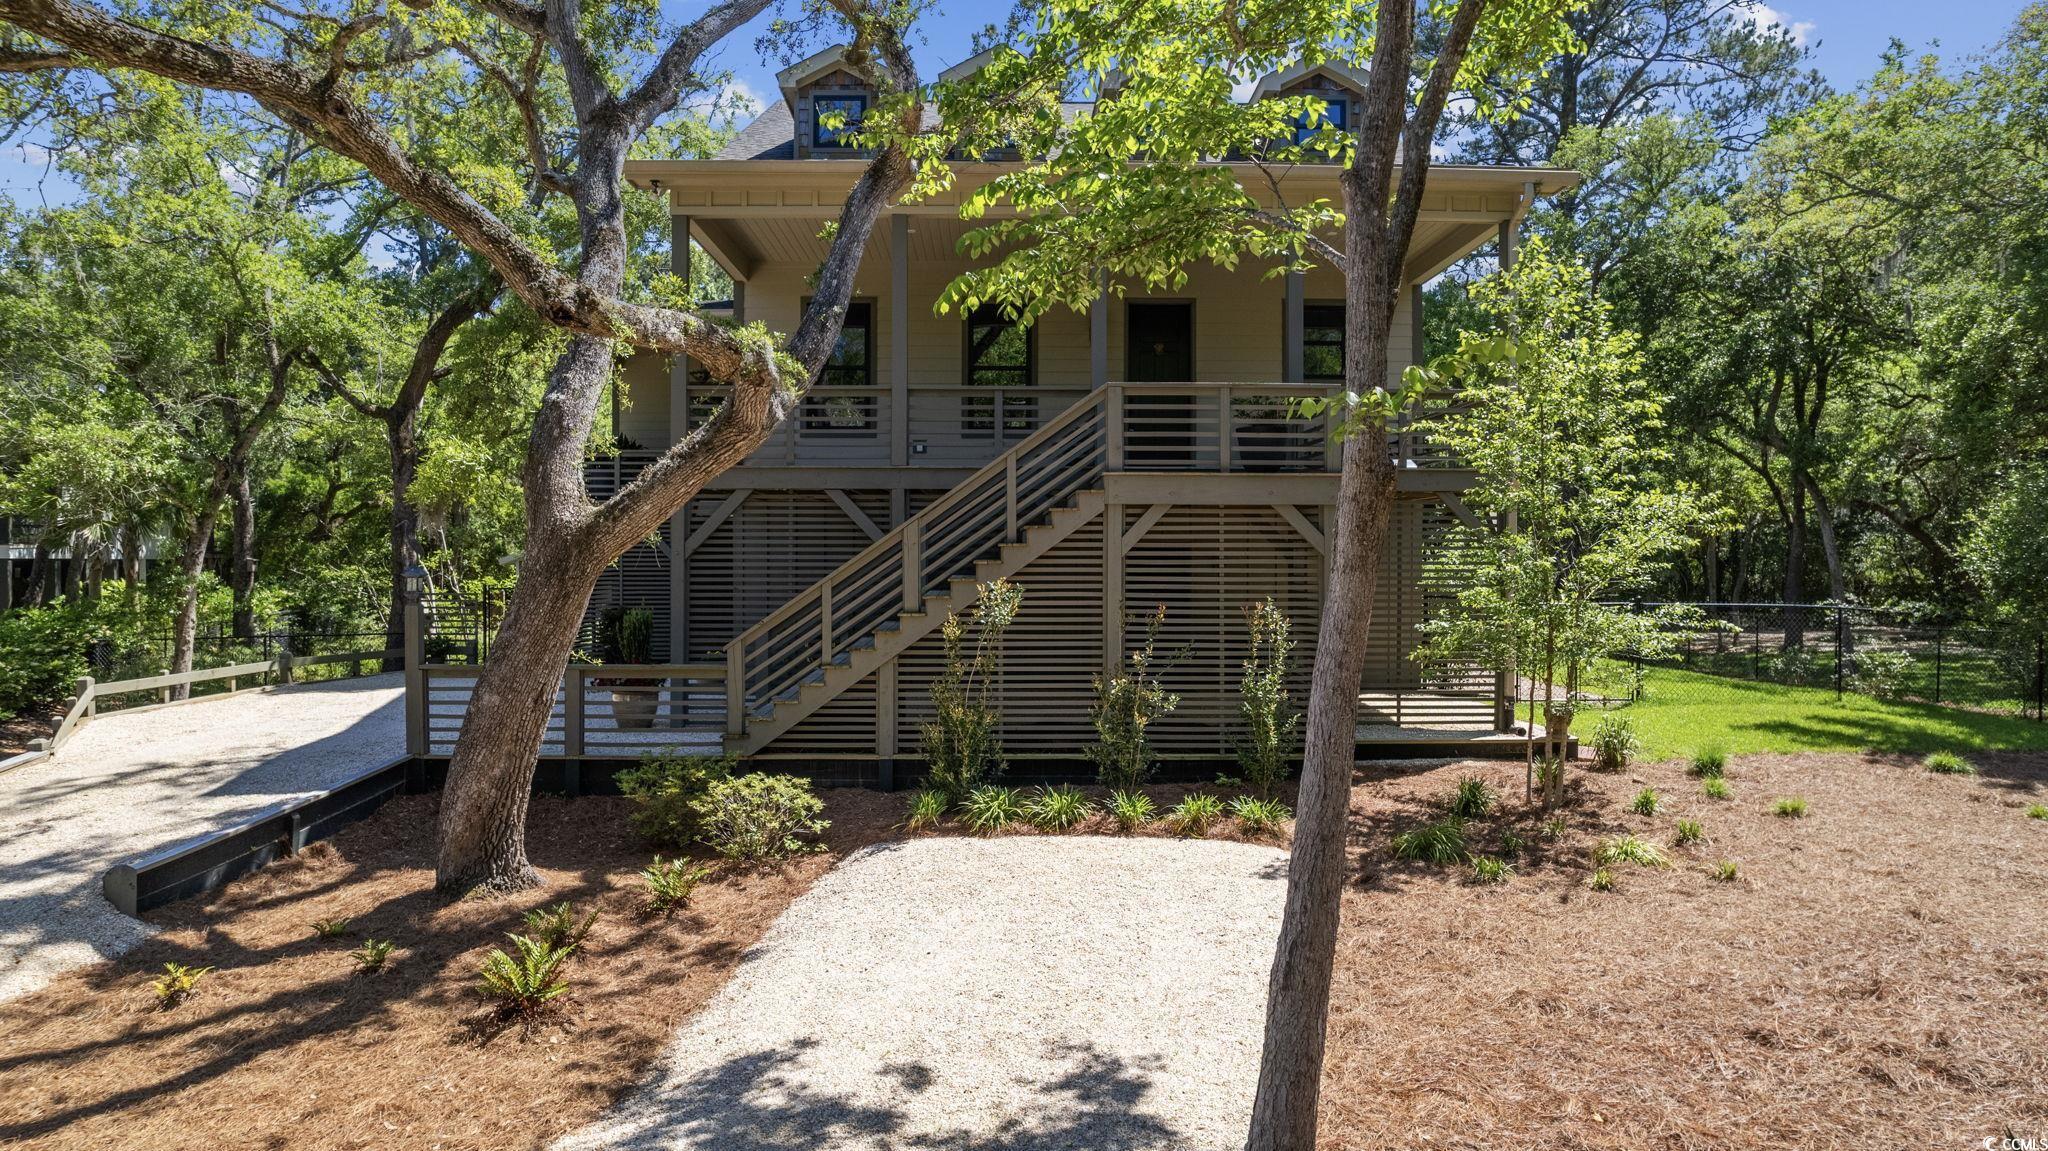 the beach is calling, and you must go! this stunning elevated beach house in pawleys island is a true custom build, completed recently in 2020. this modern coastal design is loaded with luxury finishes, quality craftsmanship, and impressive features with every corner you turn. it features 4 large bedrooms, including dual owner's suites on the primary level, and 3 full bathrooms. located on a expansive .67 acre lot on a quiet street in a small neighborhood filled with custom homes and no hoa, overlooking the inlet with the sounds of the beach in the distance; a true hidden gem tucked away yet close to all that the grand strand has to offer. coming in at 2,830 square feet this home has tons of space for living the retreat lifestyle. step inside the welcoming wide foyer, adjacent to the living room with tall vaulted ceilings and windows for all the natural light you could dream of. you will be immediately impressed upon entry with the luxury design this home offers. a flowing floor plan that provides the ideal setting for hosting gatherings with your family and friends, while also giving a sense of function and tranquility. beyond the living room, you will find the formal dining room, and the secondary owner's suite with it's own bathroom. the gourmet kitchen complete with two-toned complimenting granite countertops, stunning steven shell pendants, pristine fixtures, gas stove, african wood stained island, and walk-in pantry. tucked away on the primary level is also the massive owner's suite that is sure to knock you off your feet...the feel of living in your own personal luxury resort that you so luckily get to call home. upstairs you are greeted by a wide loft, two additional spacious secondary bedrooms, and the third full bathroom. each space, so full of charm, modern touches, and an overwhelming sense of tranquility.   noteworthy finishes include wide craftsman trim throughout, wide window sills, 10 foot ceilings, 8 foot doors, 2x6 exterior walls, custom lighting throughout including steven shell living pieces, natural wood floors that are sealed, anderson black-trim windows, and a framed-in elevator shaft. the details in a home matter, and this one truly has it all.   venture outdoors to the expansive covered porches overlooking the mature oak trees, the sounds of nature, and the breeze of the nearby ocean. exterior features also include the fenced in backyard with lush landscaping, covered parking and storage areas, and so much more. the bottom level of this home is completely finished in providing a huge closed in shop/work space, and garage parking. pawleys island charm stems from its highly ranked pristine beaches, and casual laid-back lifestyle. it is home to an abundance of outdoor activities, premier golf courses, rich history, and an array of amazing restaurants. grab your beach towel or your fishing pole, and head home to pawleys island. schedule your showing today on this remarkable, one of a kind, home!